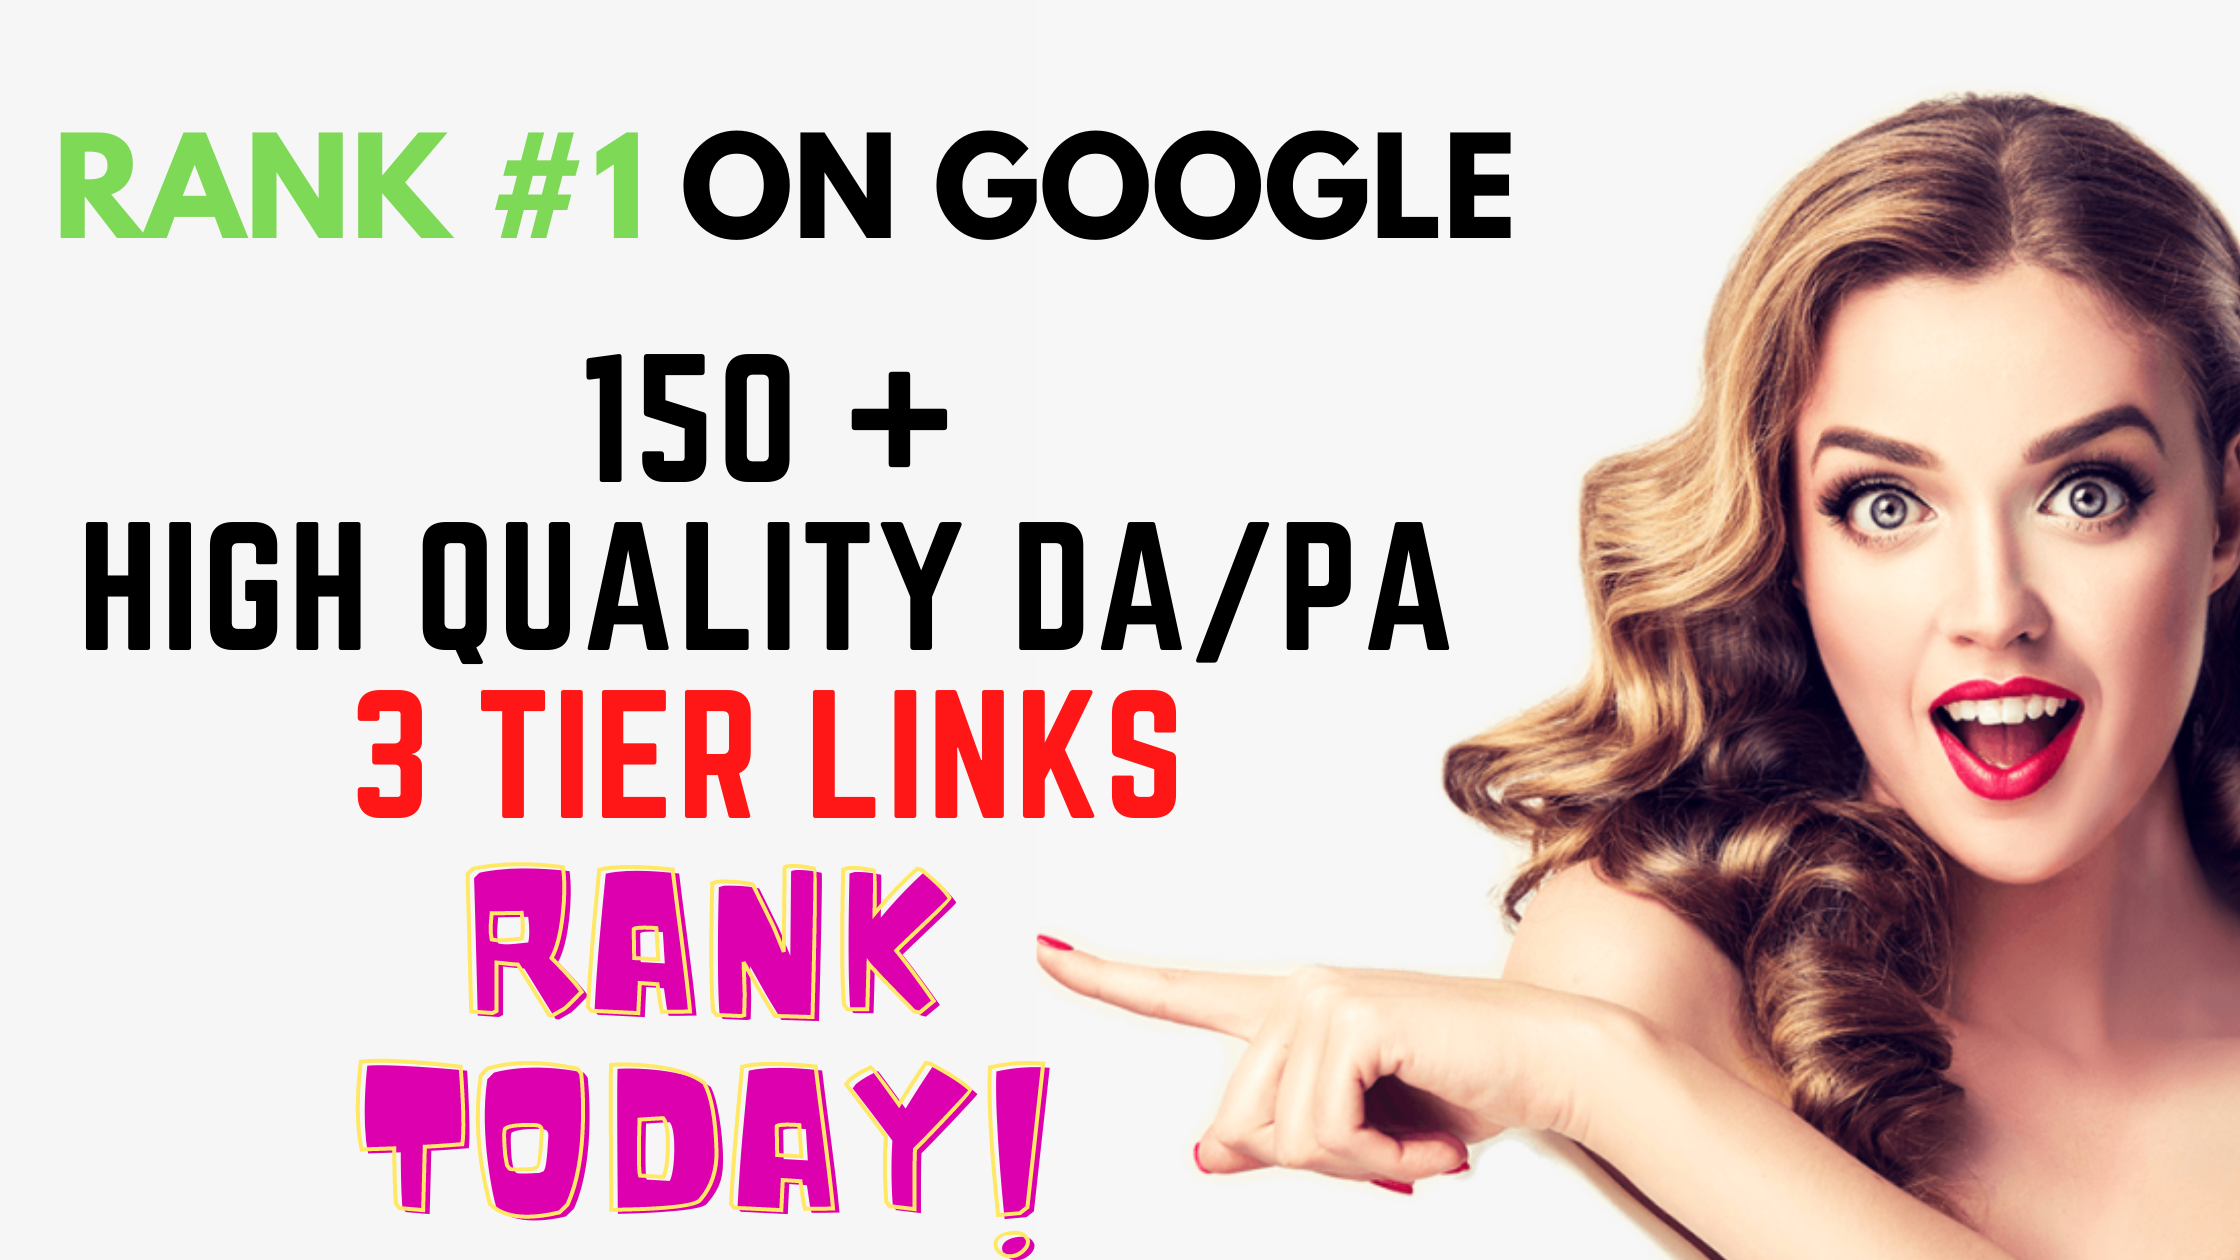 Boost Website Rank With Our High Quality DA/PA 3 Tier Link Building Service | High Quality Backlinks